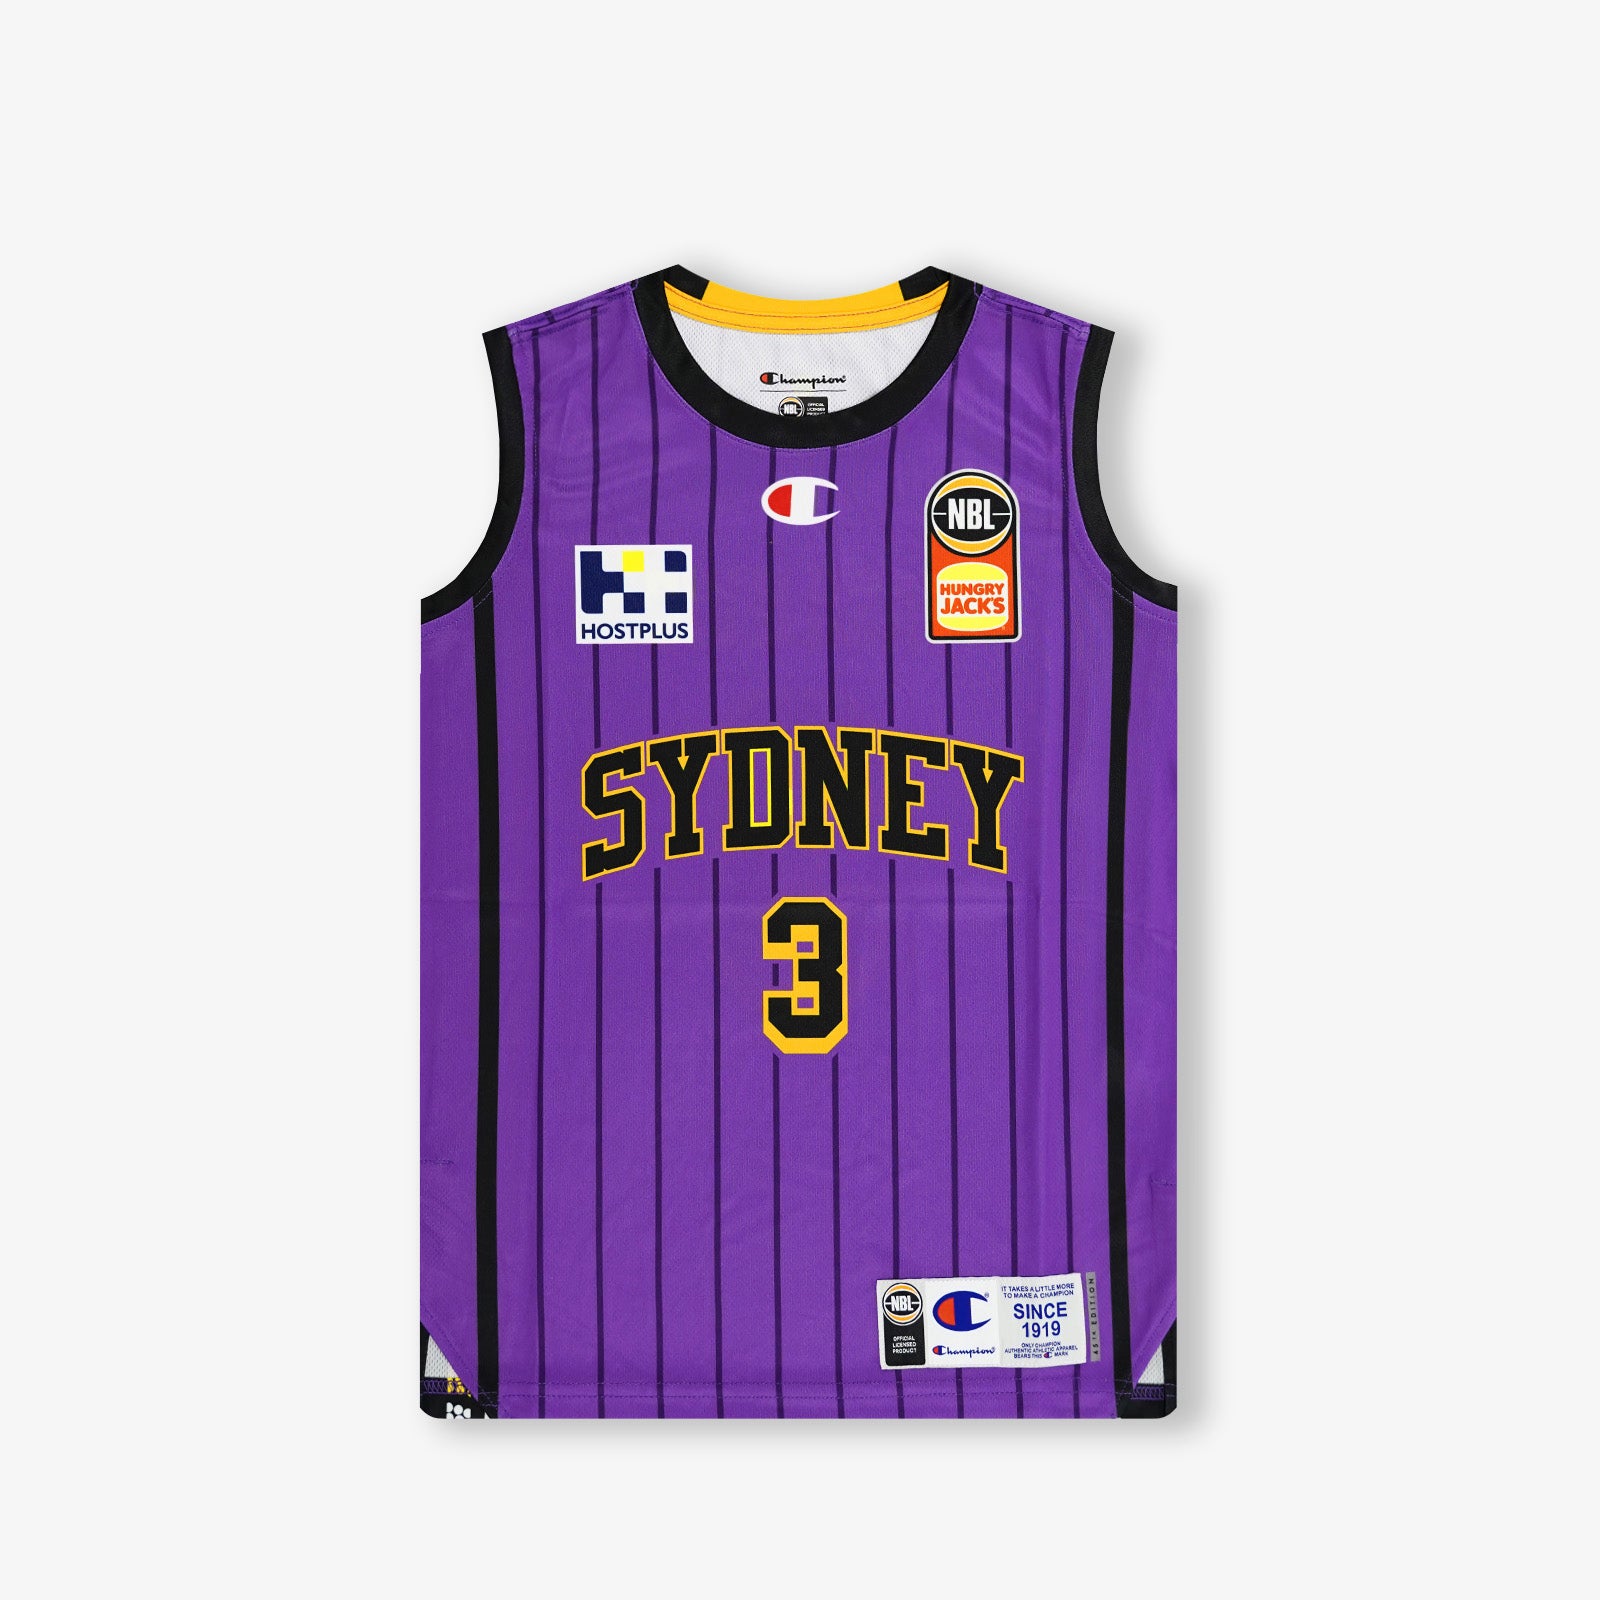 New jerseys for NBL “City” round : r/nbl